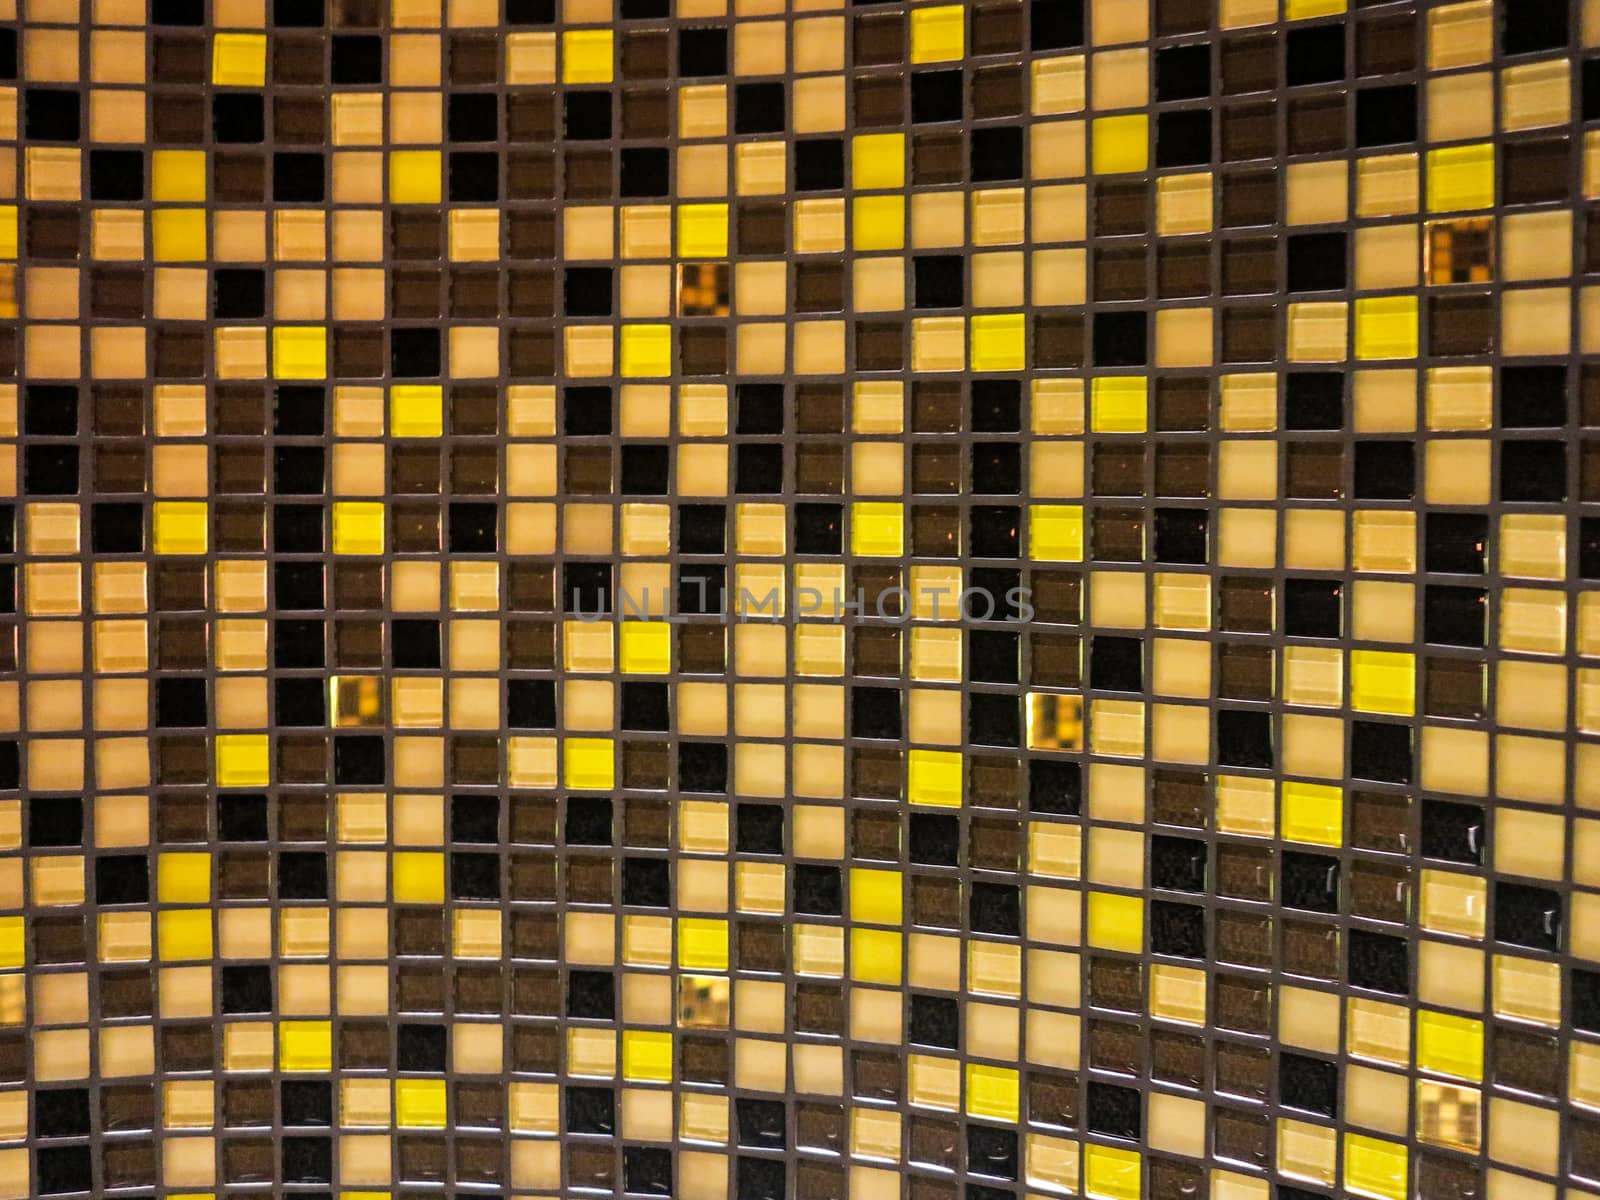 A checkered tile pattern of different colors